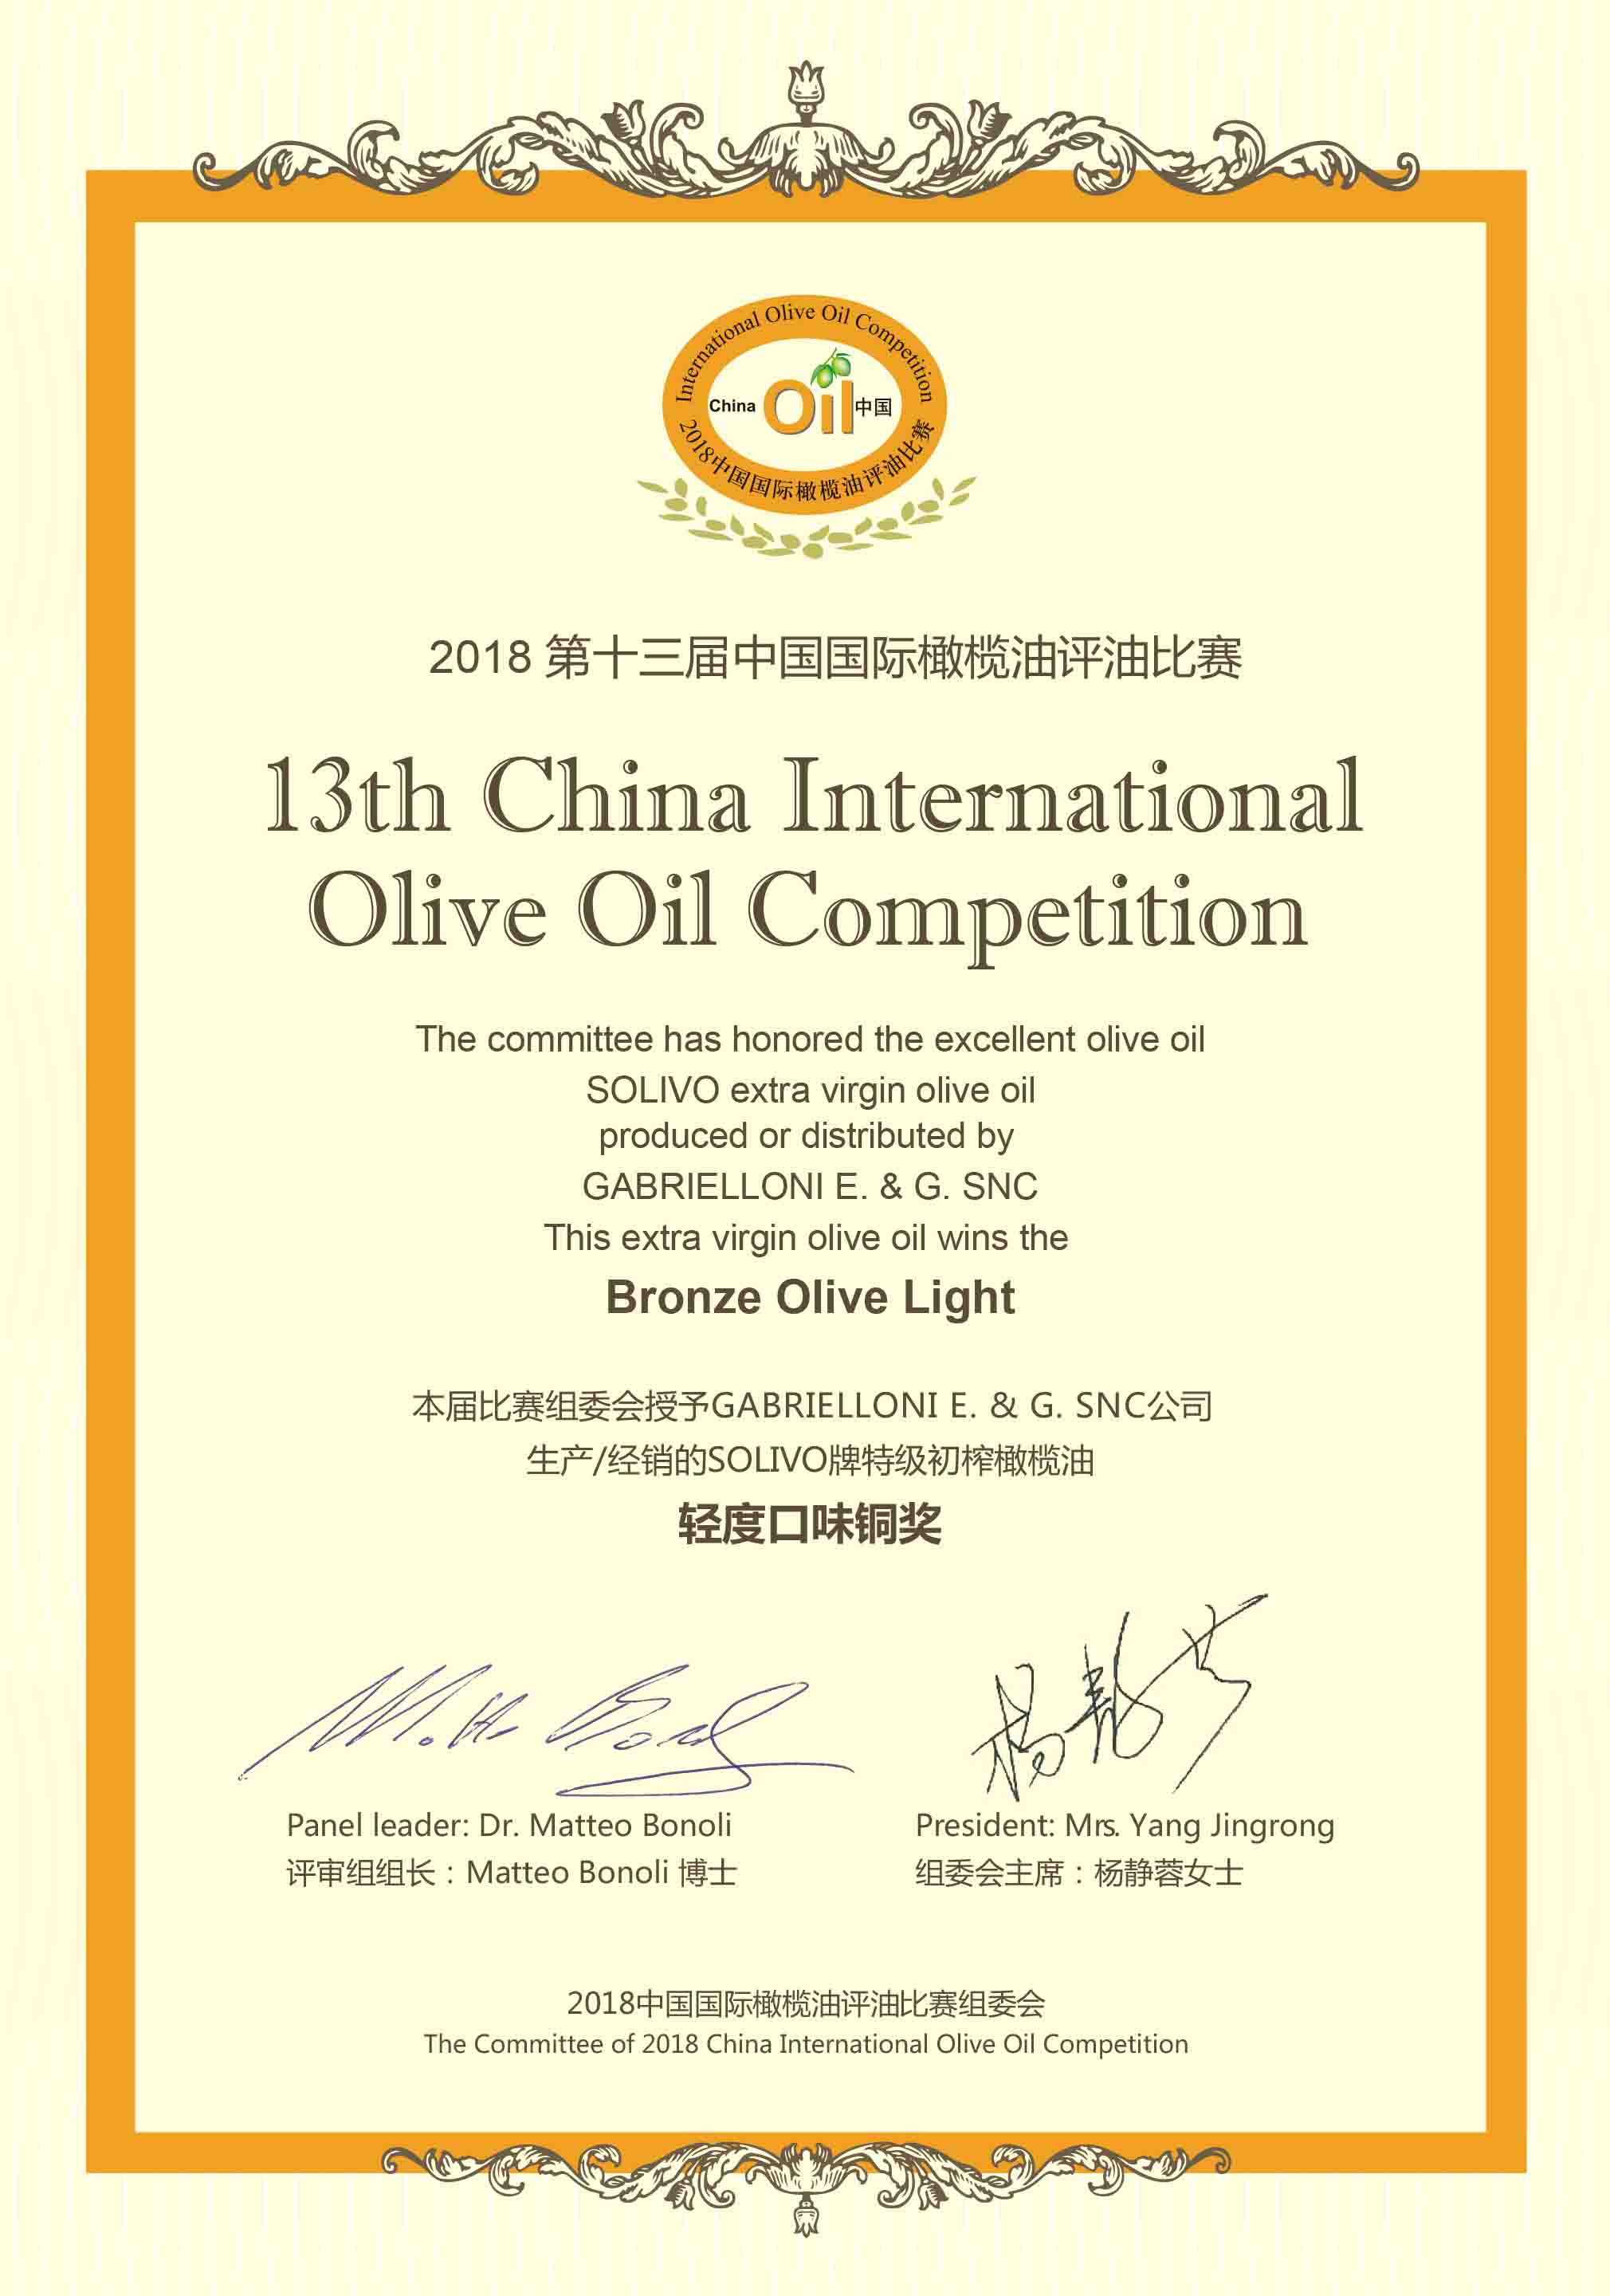 China International Olive Oil Competition 2018